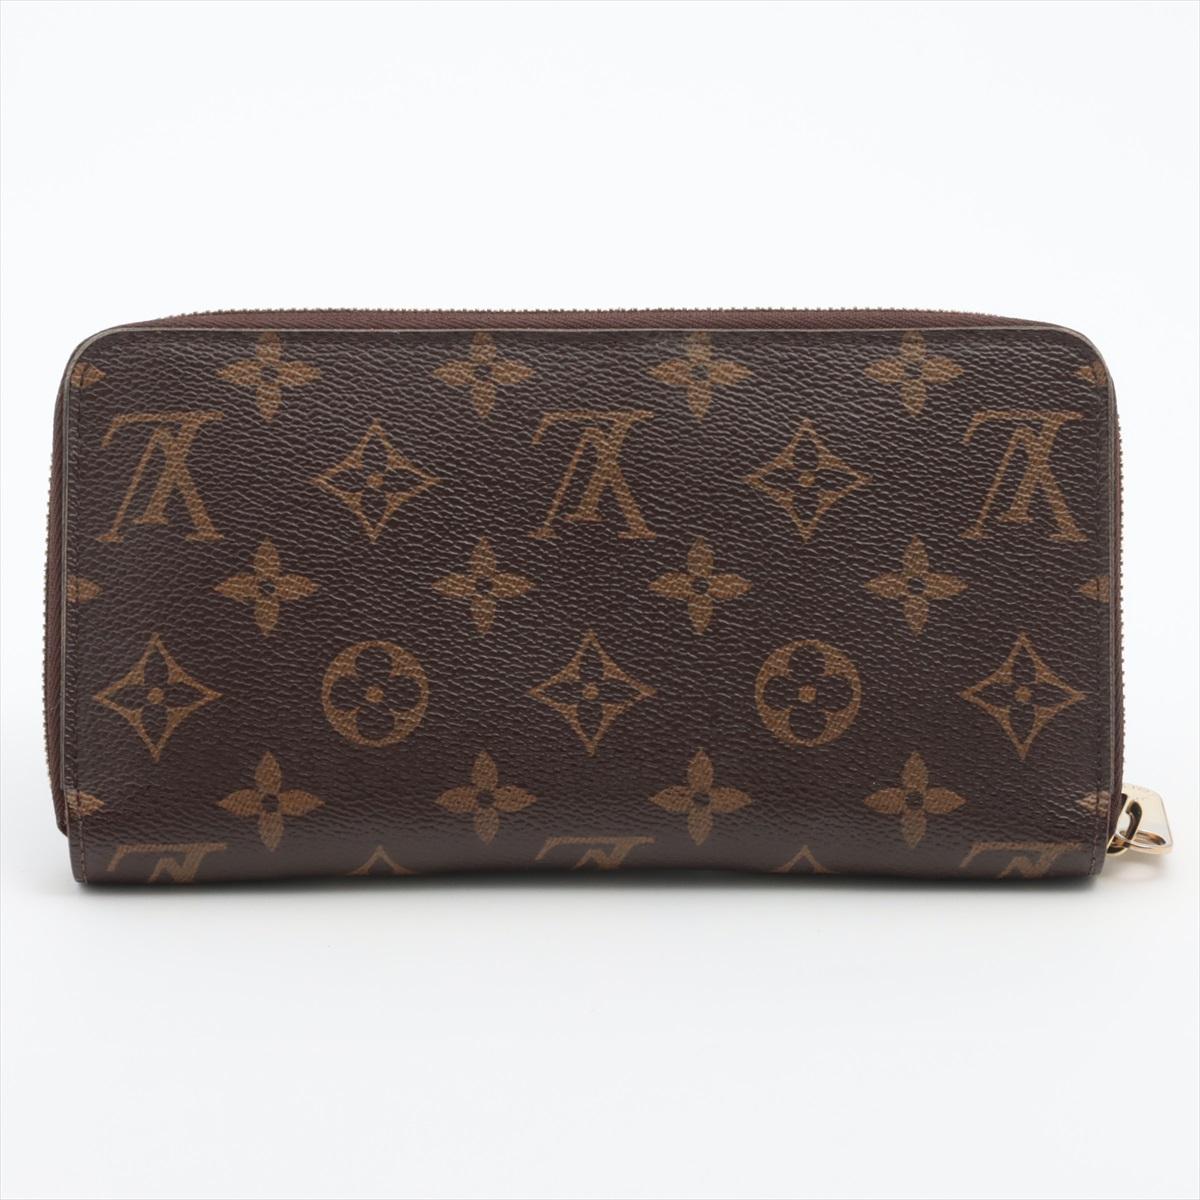 Louis Vuitton Monogram Zippy Wallet In Good Condition For Sale In Indianapolis, IN